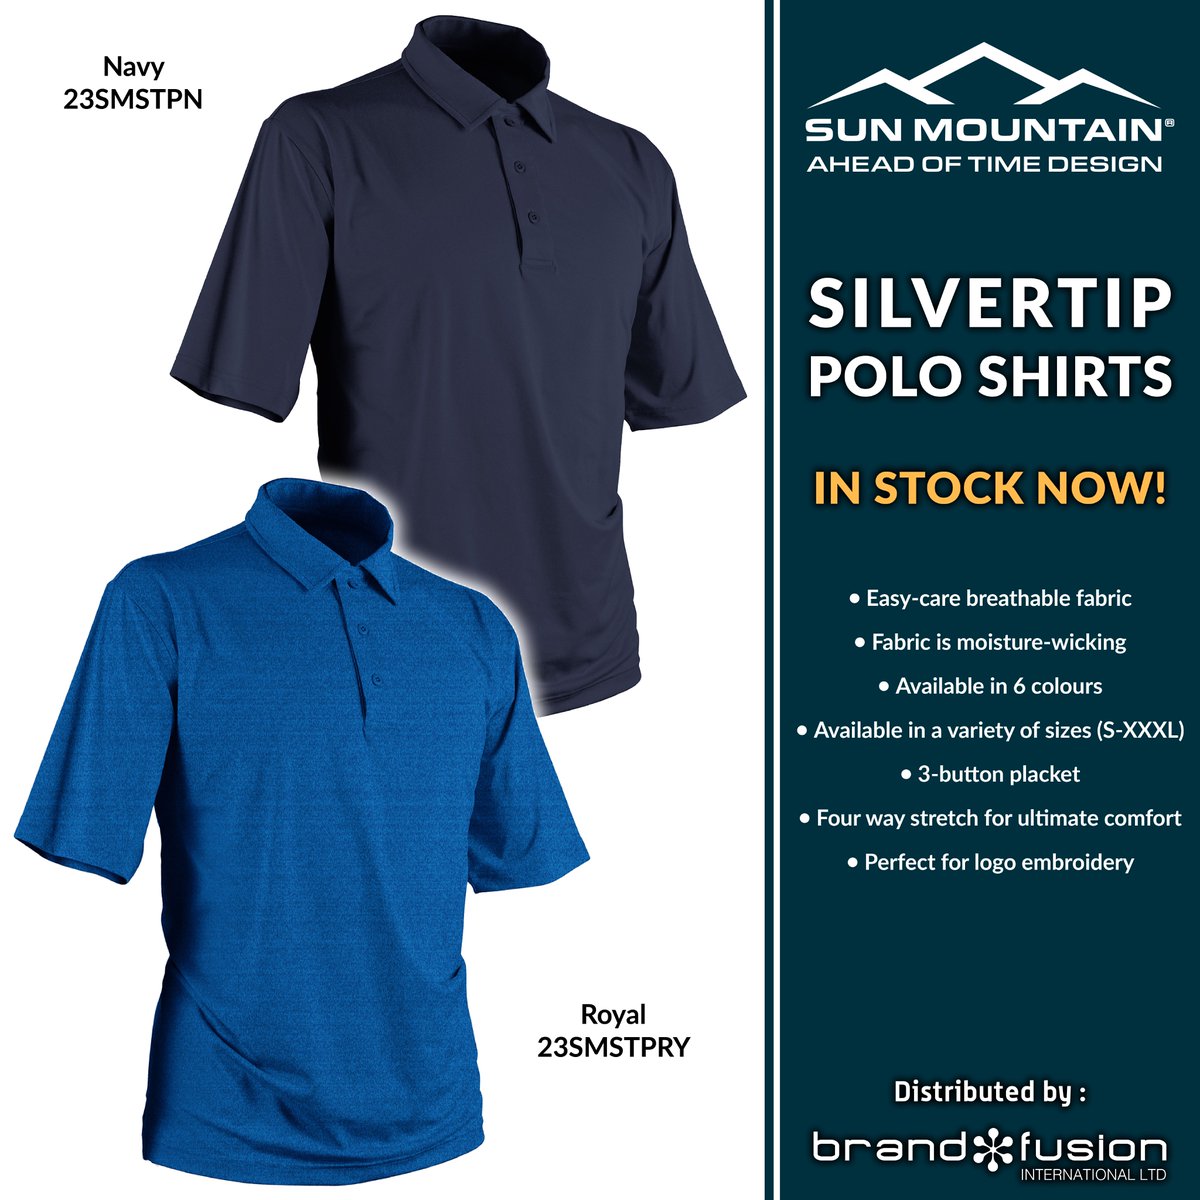 Silvertip Polo shirts from Sun Mountain In stock now in 6 colours - The perfect shirt for embroidery with your club logo - Easy-care, breathable, moisture-wicking fabric - Four way stretch for ultimate comfort #sunmountain #polo #poloshirt #golfshirt #embroidery #golf #ukgolf